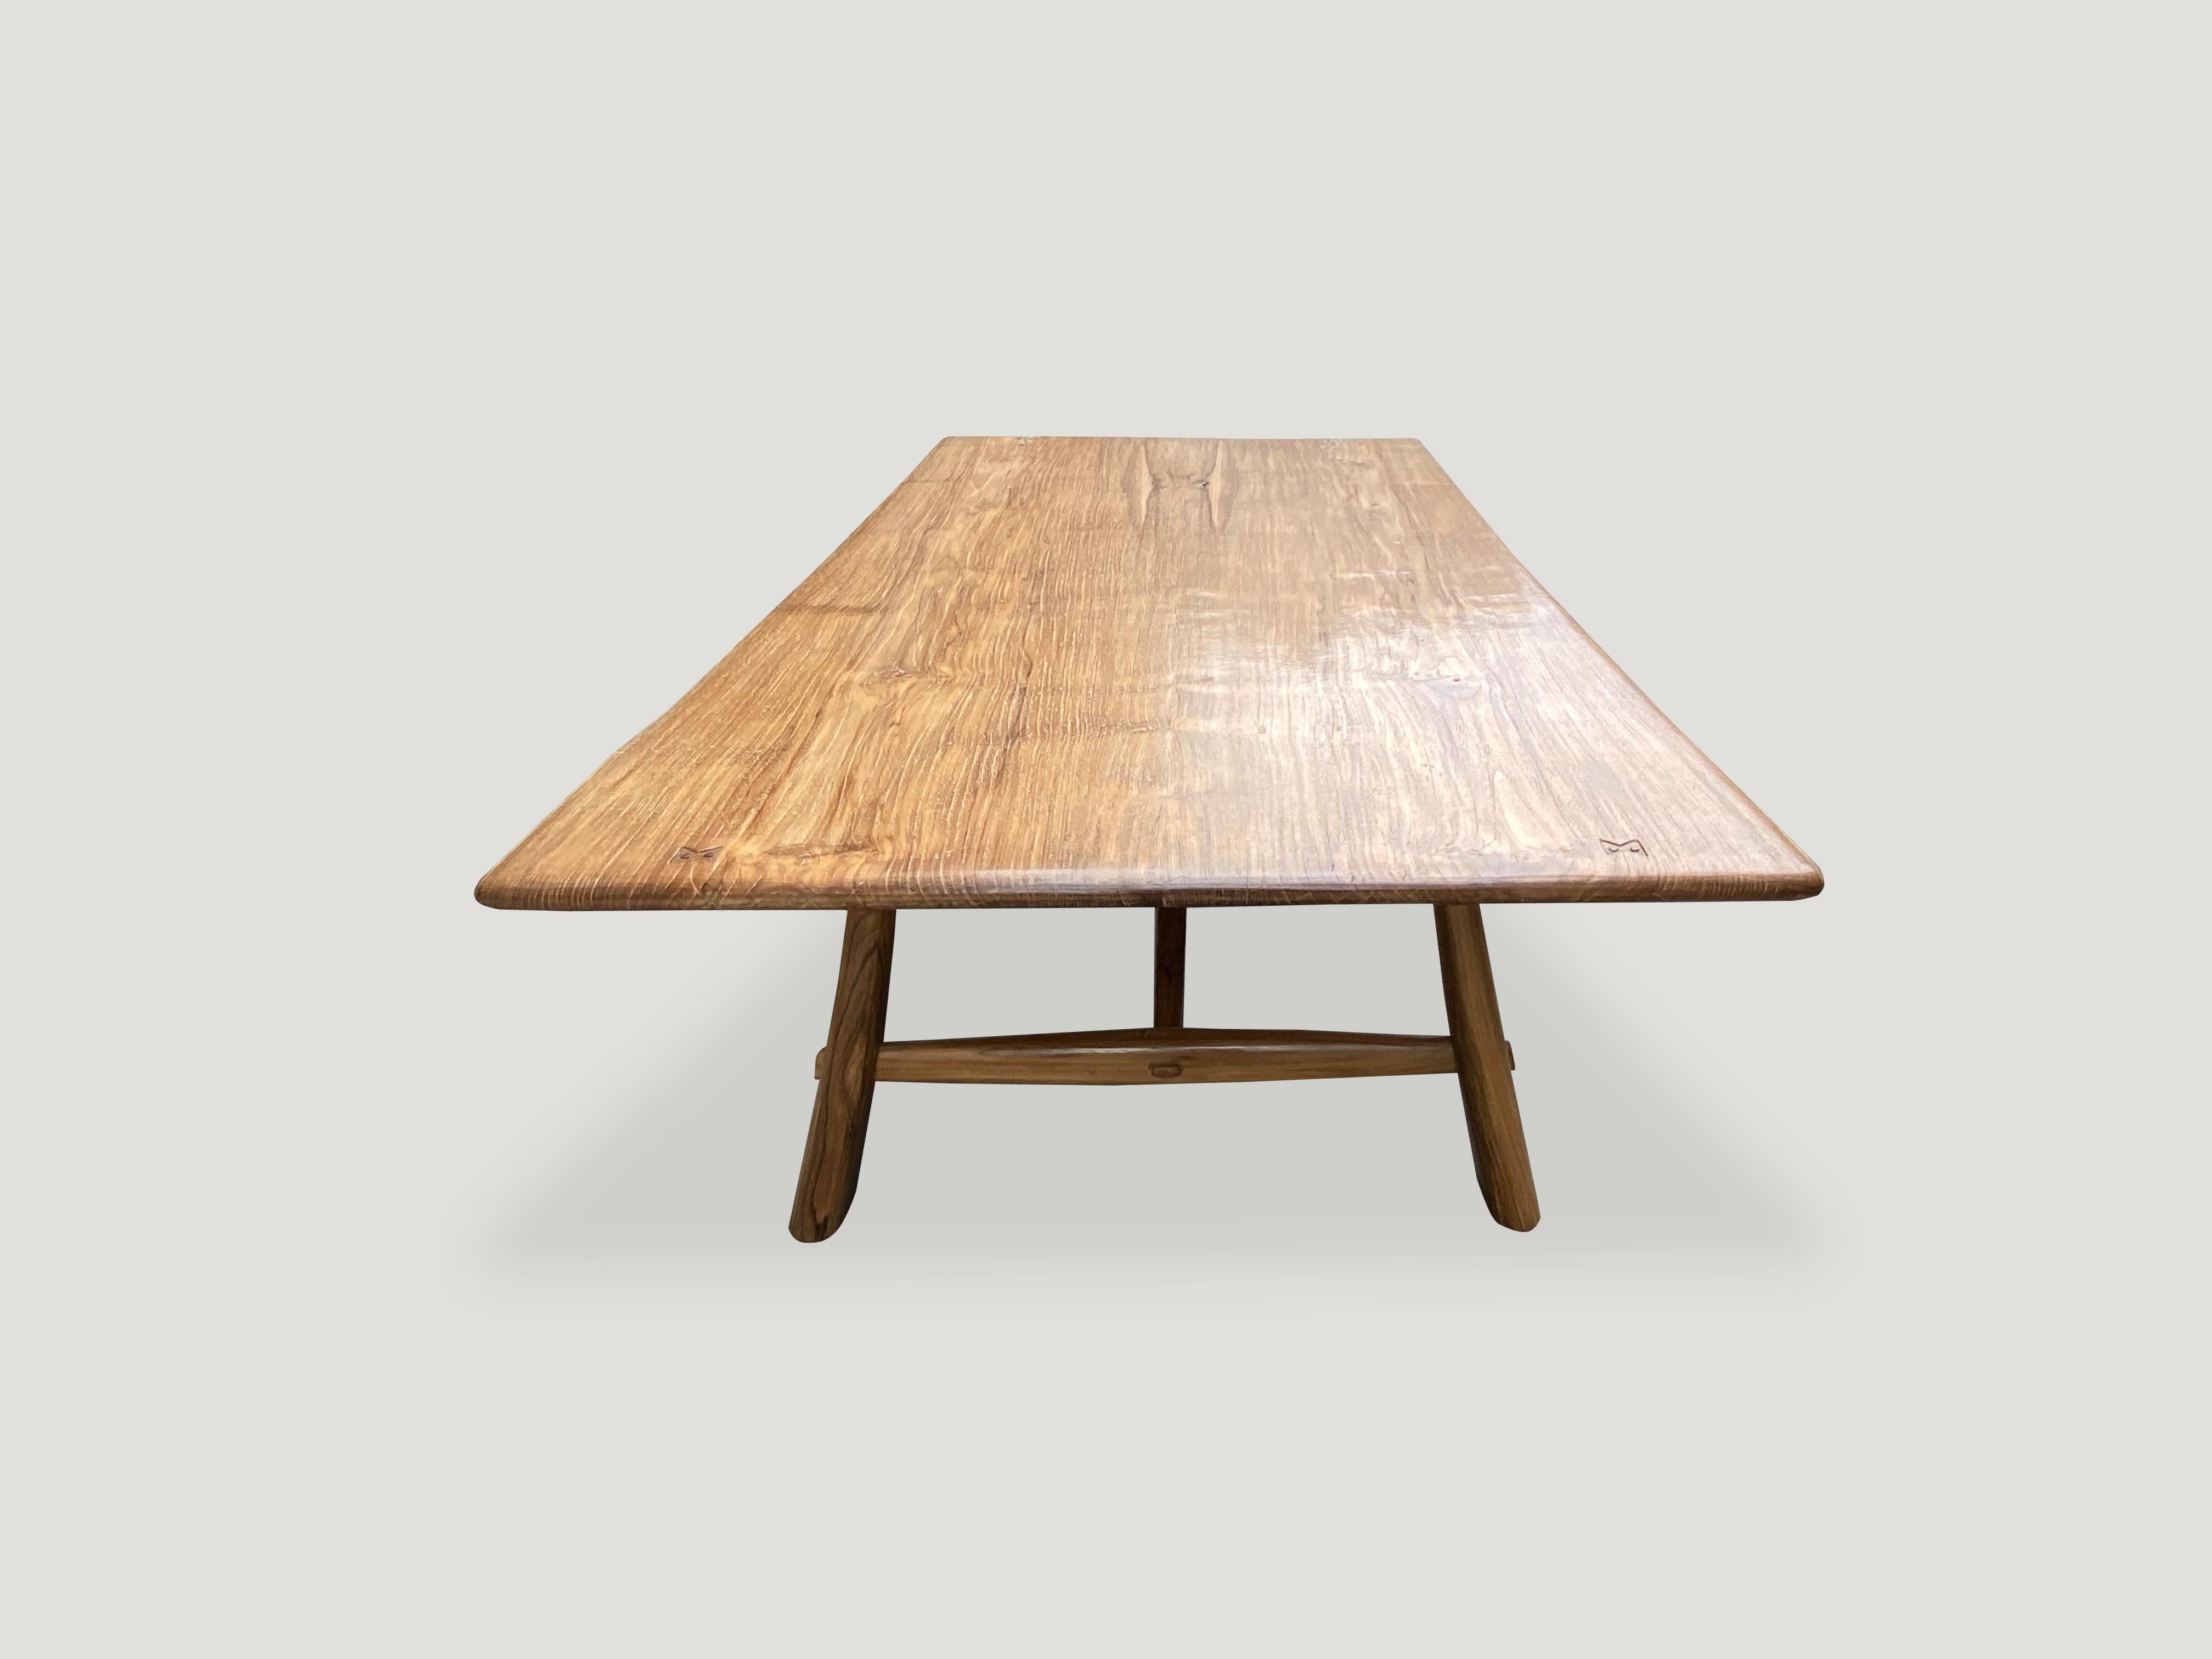 Andrianna Shamaris Midcentury Couture Teak Wood Dining Table For Sale 5